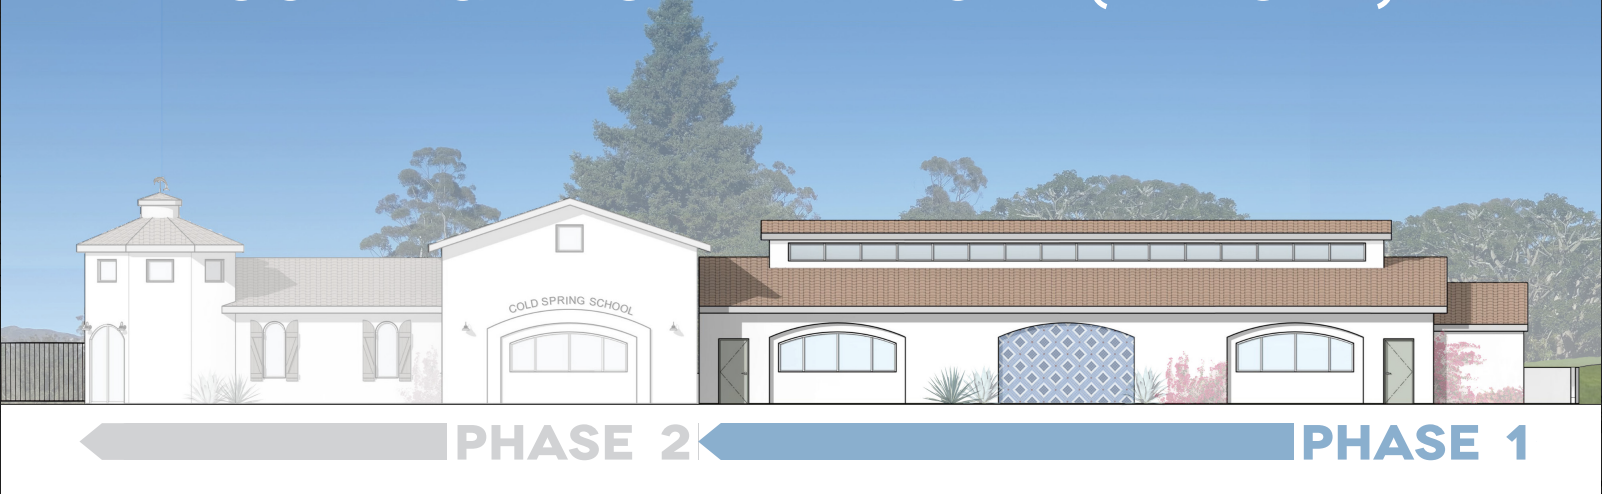 Proposed New Classrom Building along Cold Spring Road